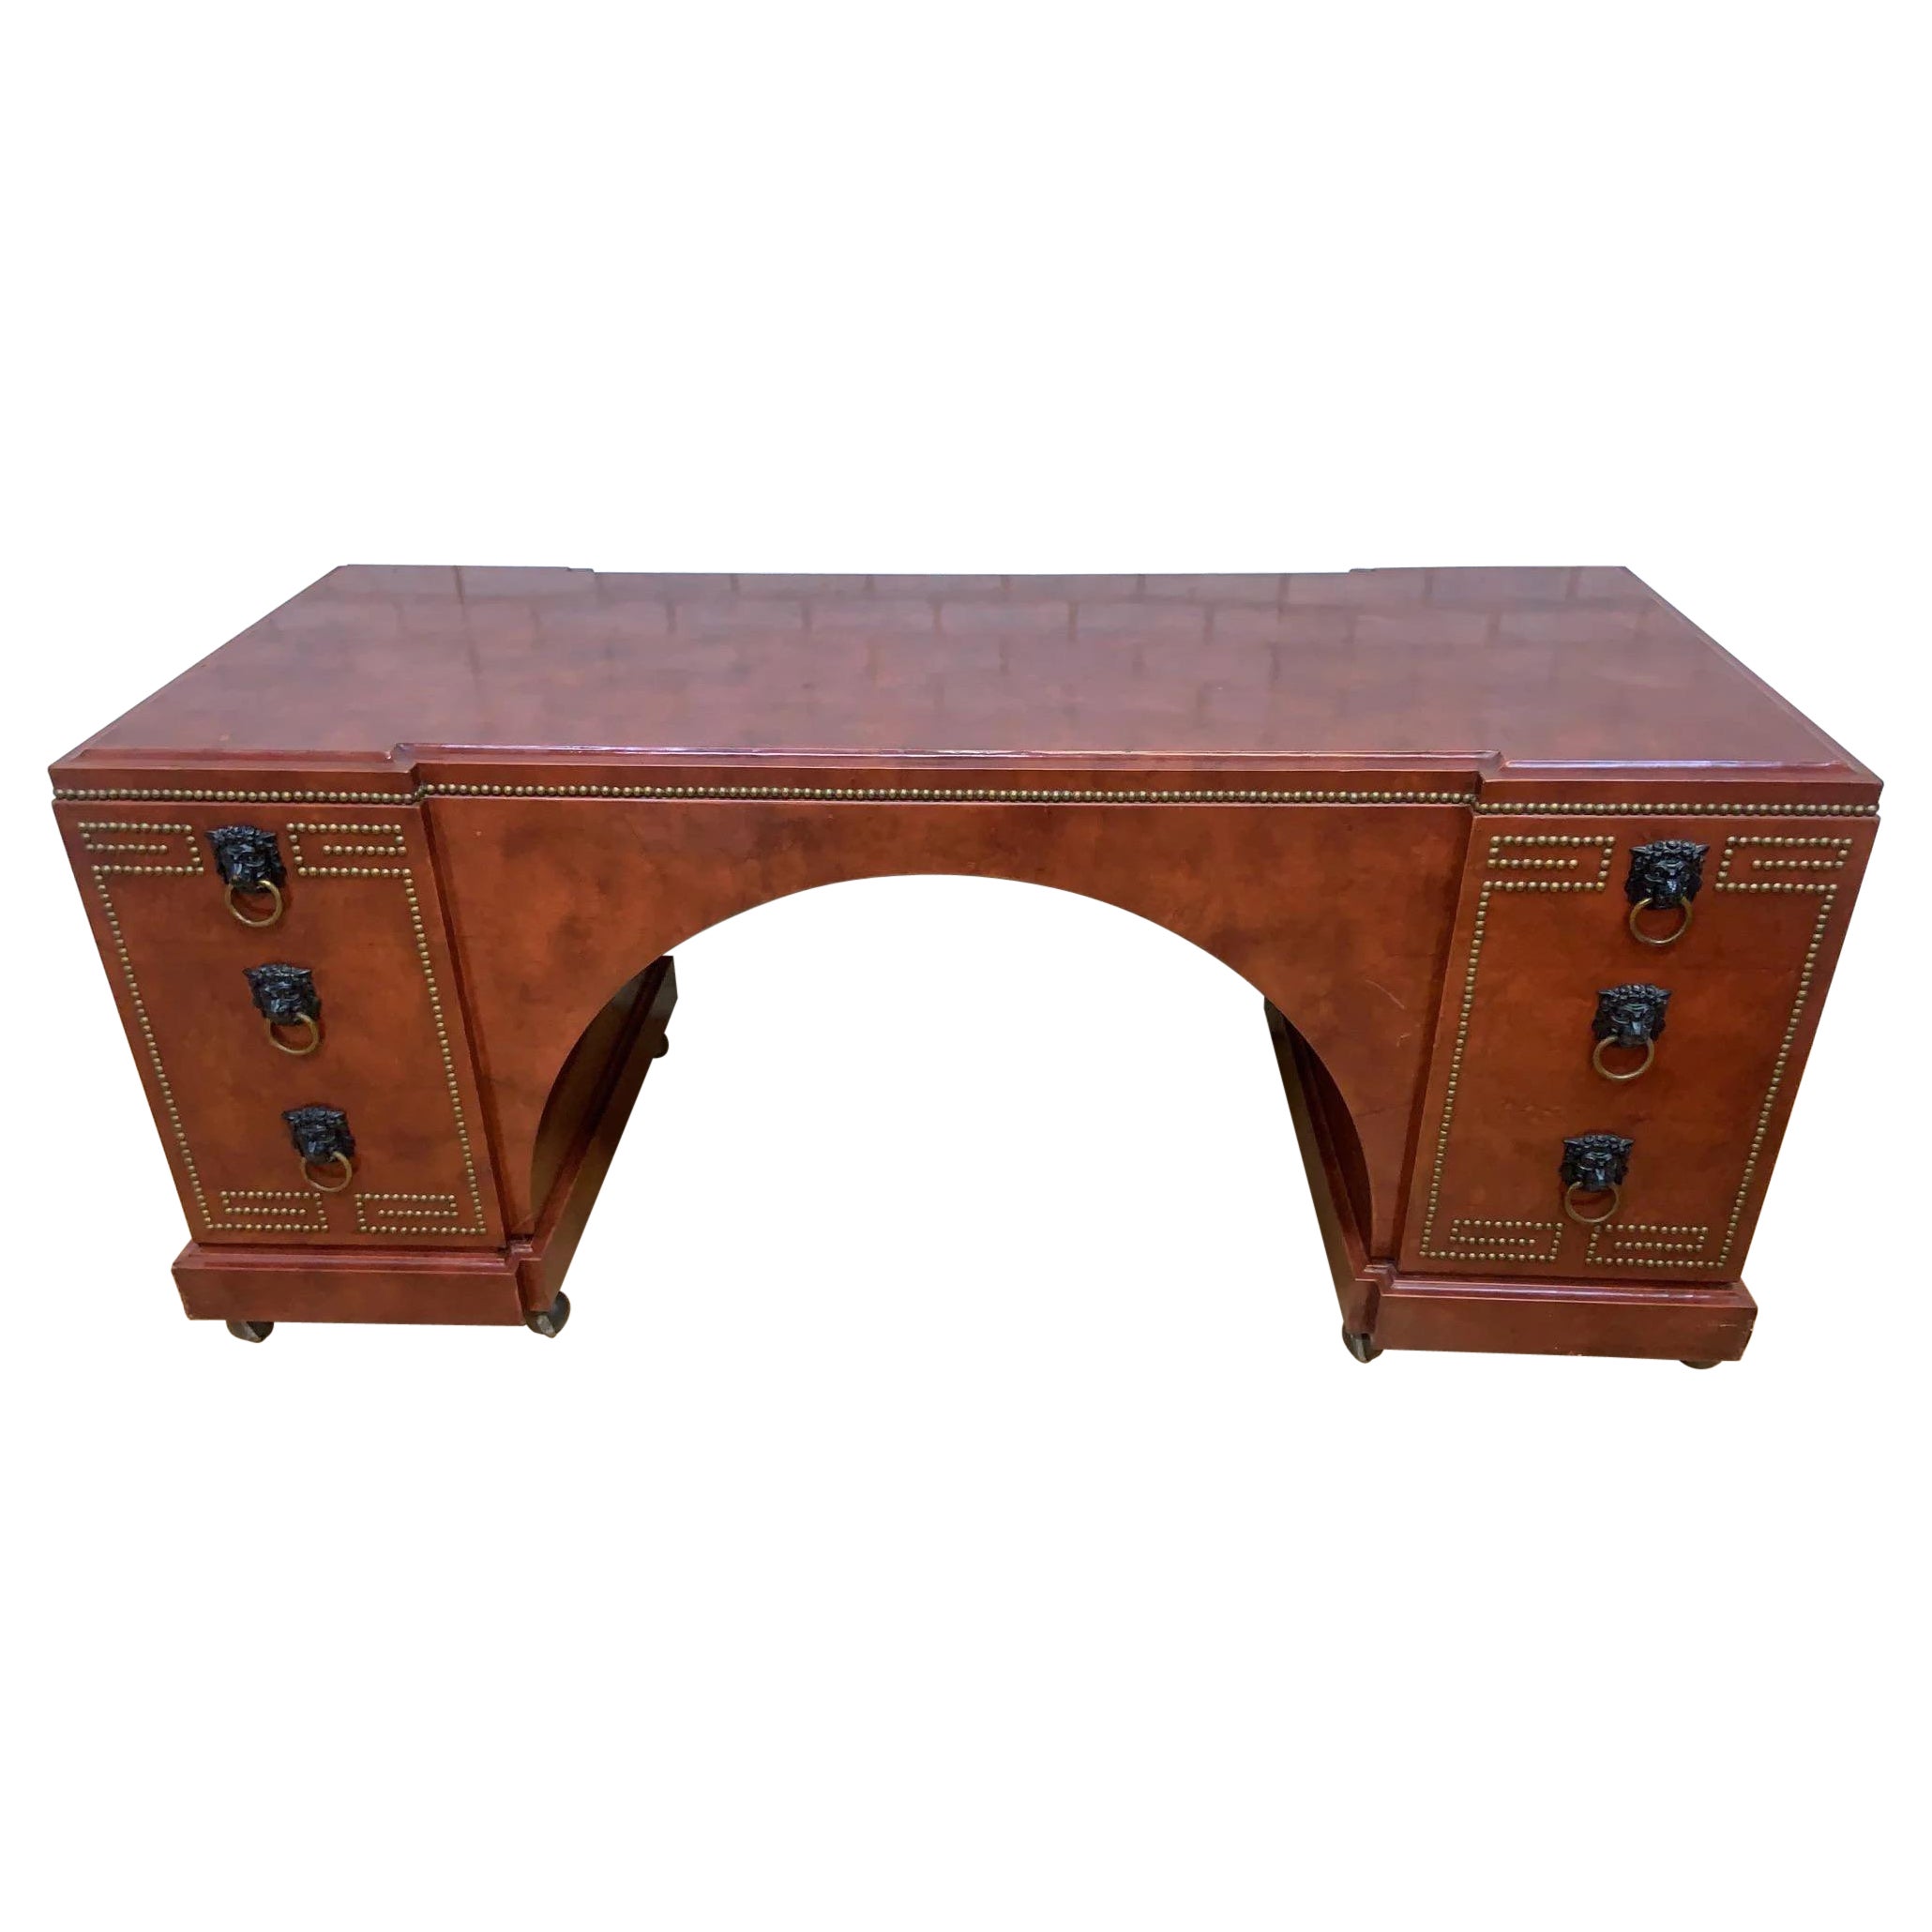 Vintage Baroque Style Leather Wrapped Studded Partner Desk with Lion Pulls For Sale